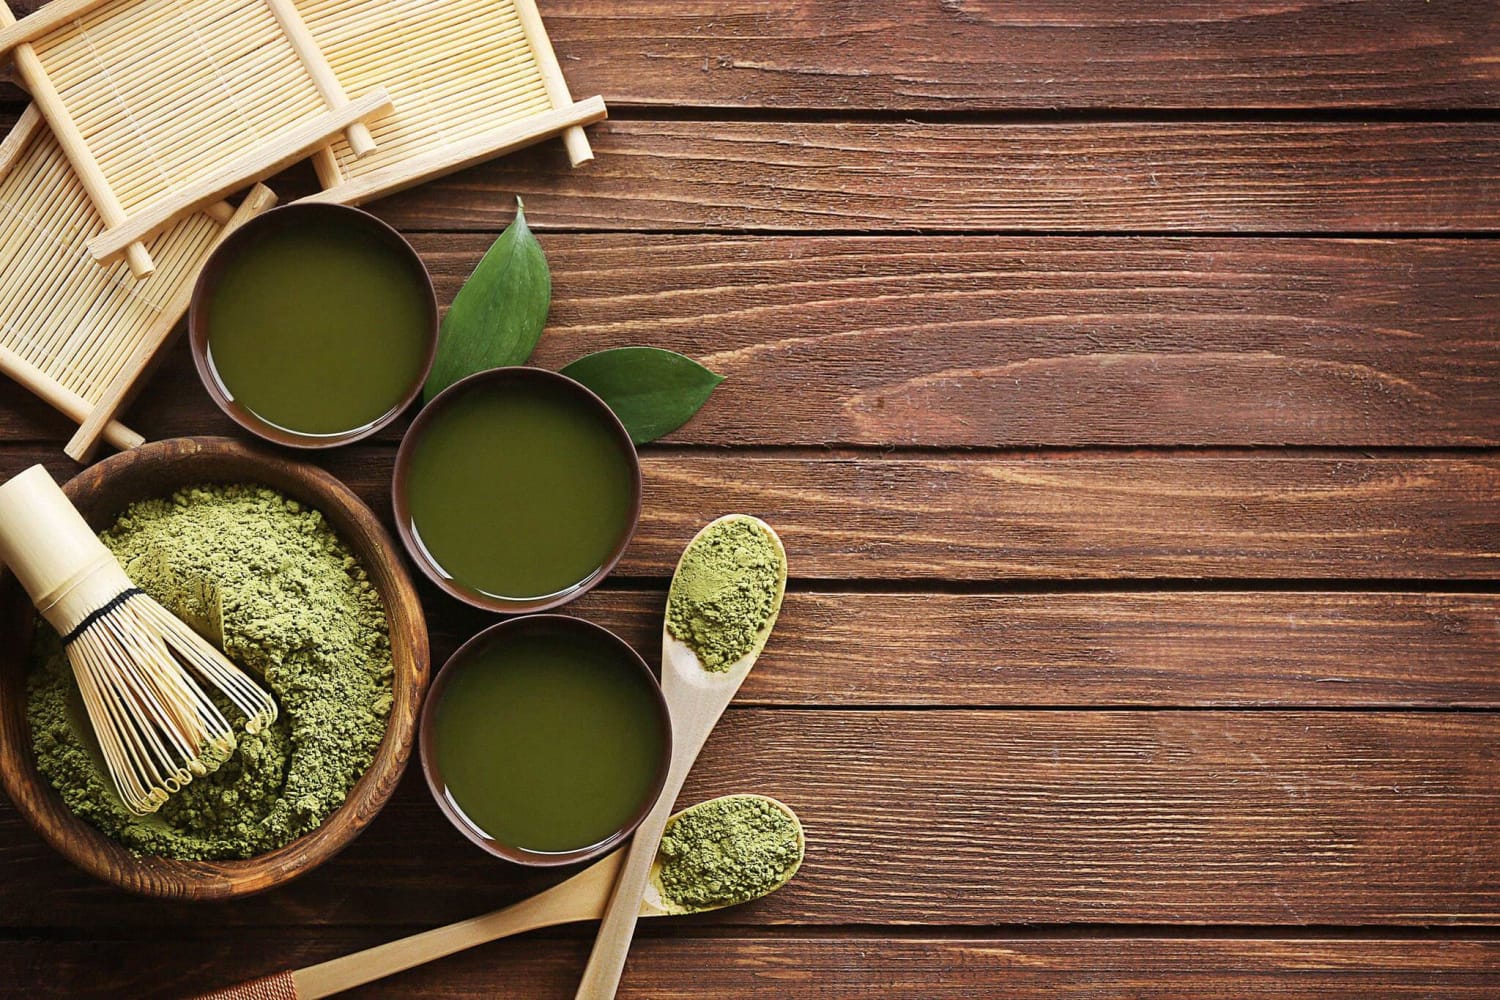 How to Buy Red Horn Kratom Online - A Complete Guide 2021